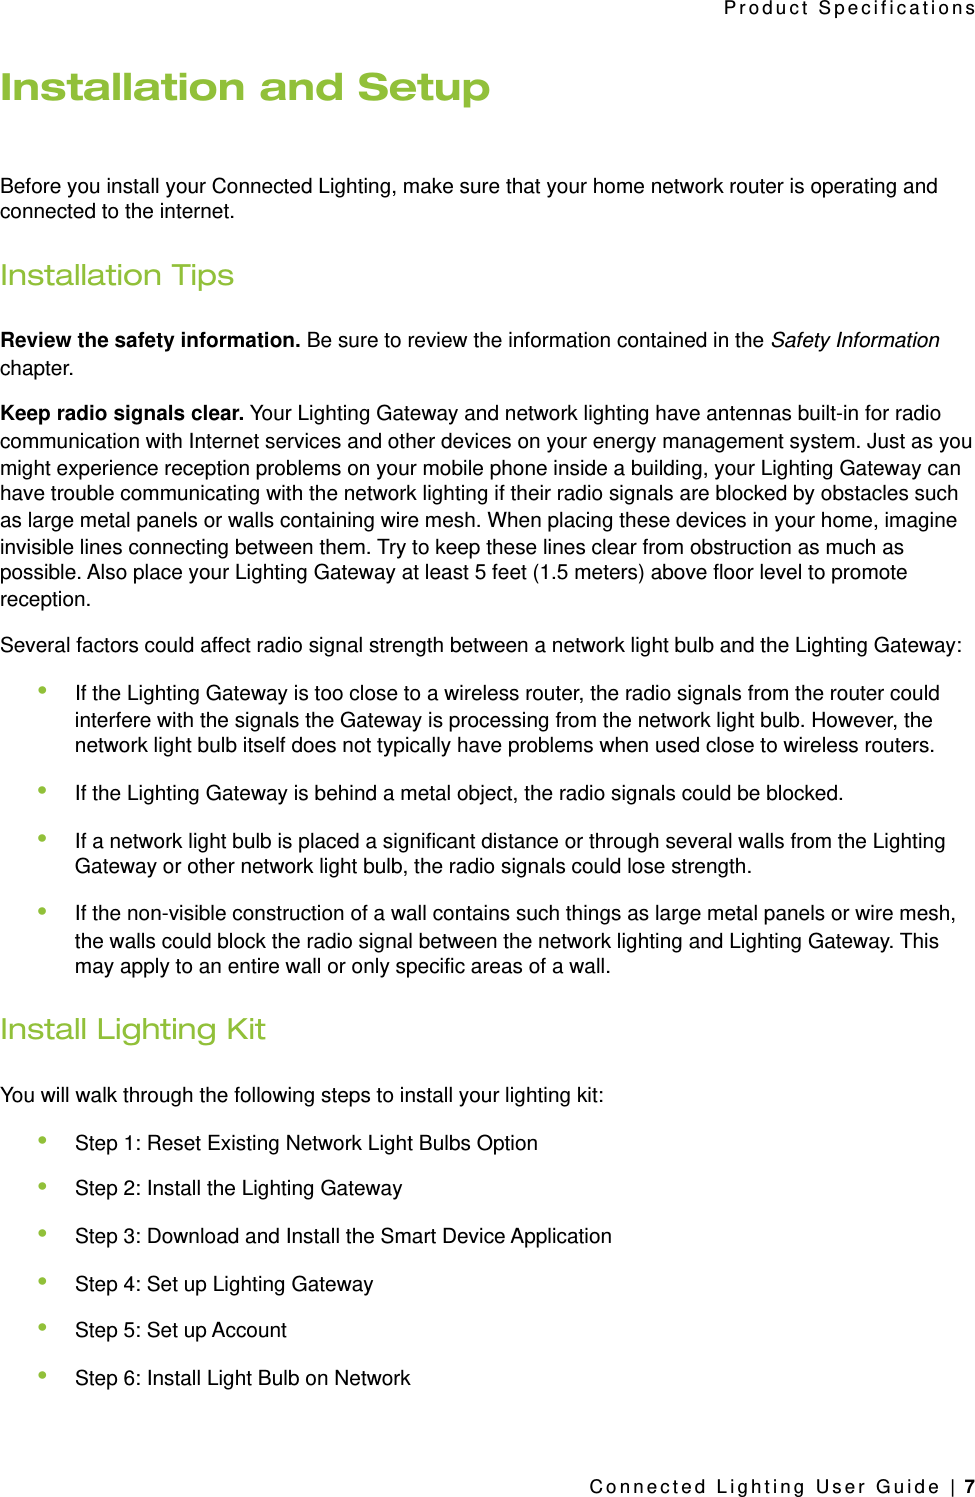 Installation and SetupBefore you install your Connected Lighting, make sure that your home network router is operating and connected to the internet.Installation TipsReview the safety information. Be sure to review the information contained in the Safety Information chapter.Keep radio signals clear. Your Lighting Gateway and network lighting have antennas built-in for radio communication with Internet services and other devices on your energy management system. Just as you might experience reception problems on your mobile phone inside a building, your Lighting Gateway can have trouble communicating with the network lighting if their radio signals are blocked by obstacles such as large metal panels or walls containing wire mesh. When placing these devices in your home, imagine invisible lines connecting between them. Try to keep these lines clear from obstruction as much as possible. Also place your Lighting Gateway at least 5 feet (1.5 meters) above floor level to promote reception.Several factors could affect radio signal strength between a network light bulb and the Lighting Gateway:•If the Lighting Gateway is too close to a wireless router, the radio signals from the router could interfere with the signals the Gateway is processing from the network light bulb. However, the network light bulb itself does not typically have problems when used close to wireless routers.•If the Lighting Gateway is behind a metal object, the radio signals could be blocked.•If a network light bulb is placed a significant distance or through several walls from the Lighting Gateway or other network light bulb, the radio signals could lose strength.•If the non-visible construction of a wall contains such things as large metal panels or wire mesh, the walls could block the radio signal between the network lighting and Lighting Gateway. This may apply to an entire wall or only specific areas of a wall.Install Lighting KitYou will walk through the following steps to install your lighting kit:•Step 1: Reset Existing Network Light Bulbs Option•Step 2: Install the Lighting Gateway•Step 3: Download and Install the Smart Device Application•Step 4: Set up Lighting Gateway•Step 5: Set up Account•Step 6: Install Light Bulb on NetworkProduct SpecificationsConnected Lighting User Guide | 7